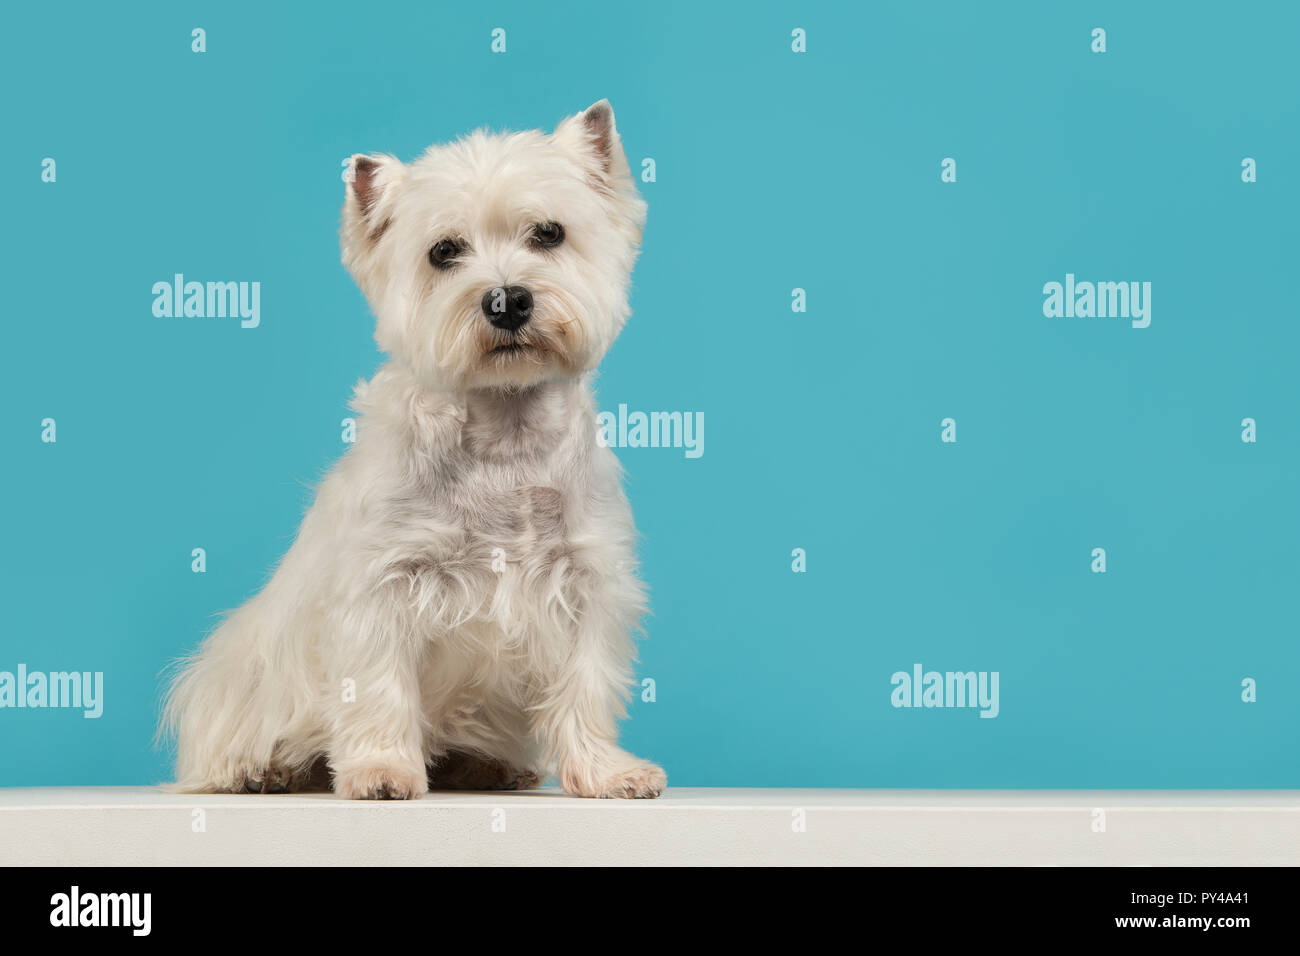 Cute sitting west highland white terrier or westie looking at the camera on a blue background with copy space Stock Photo